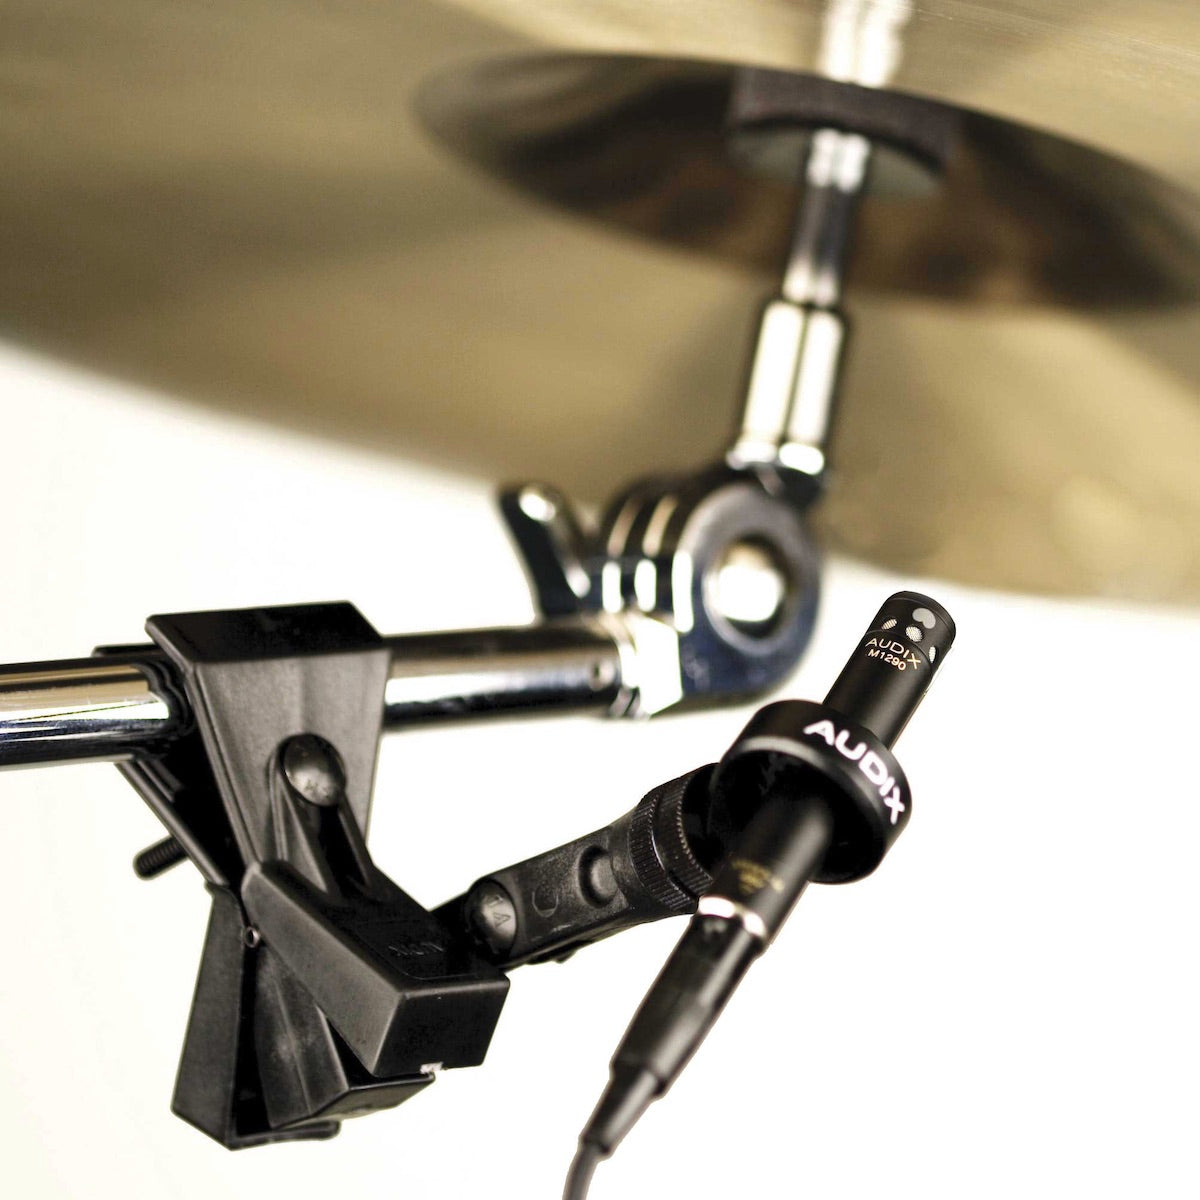 Audix M1250B Miniaturized Condenser Microphone, mounted under a cymbal